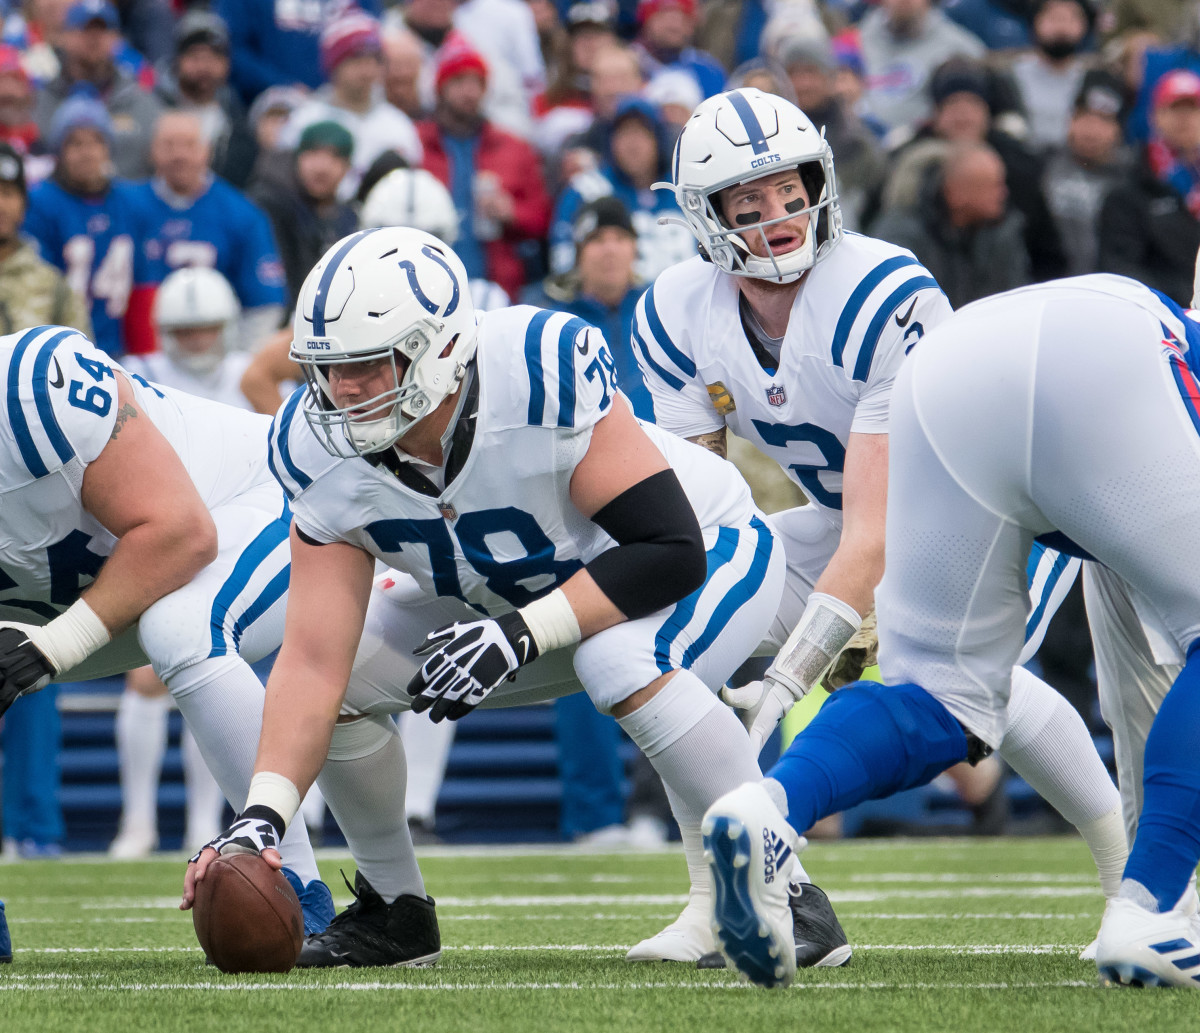 Nov 21, 2021; Orchard Park, New York, USA; Indianapolis Colts quarterback Carson Wentz (2) and center Ryan Kelly (78) at the line of scrimmage against the Buffalo Bills in the first quarter at Highmark Stadium.